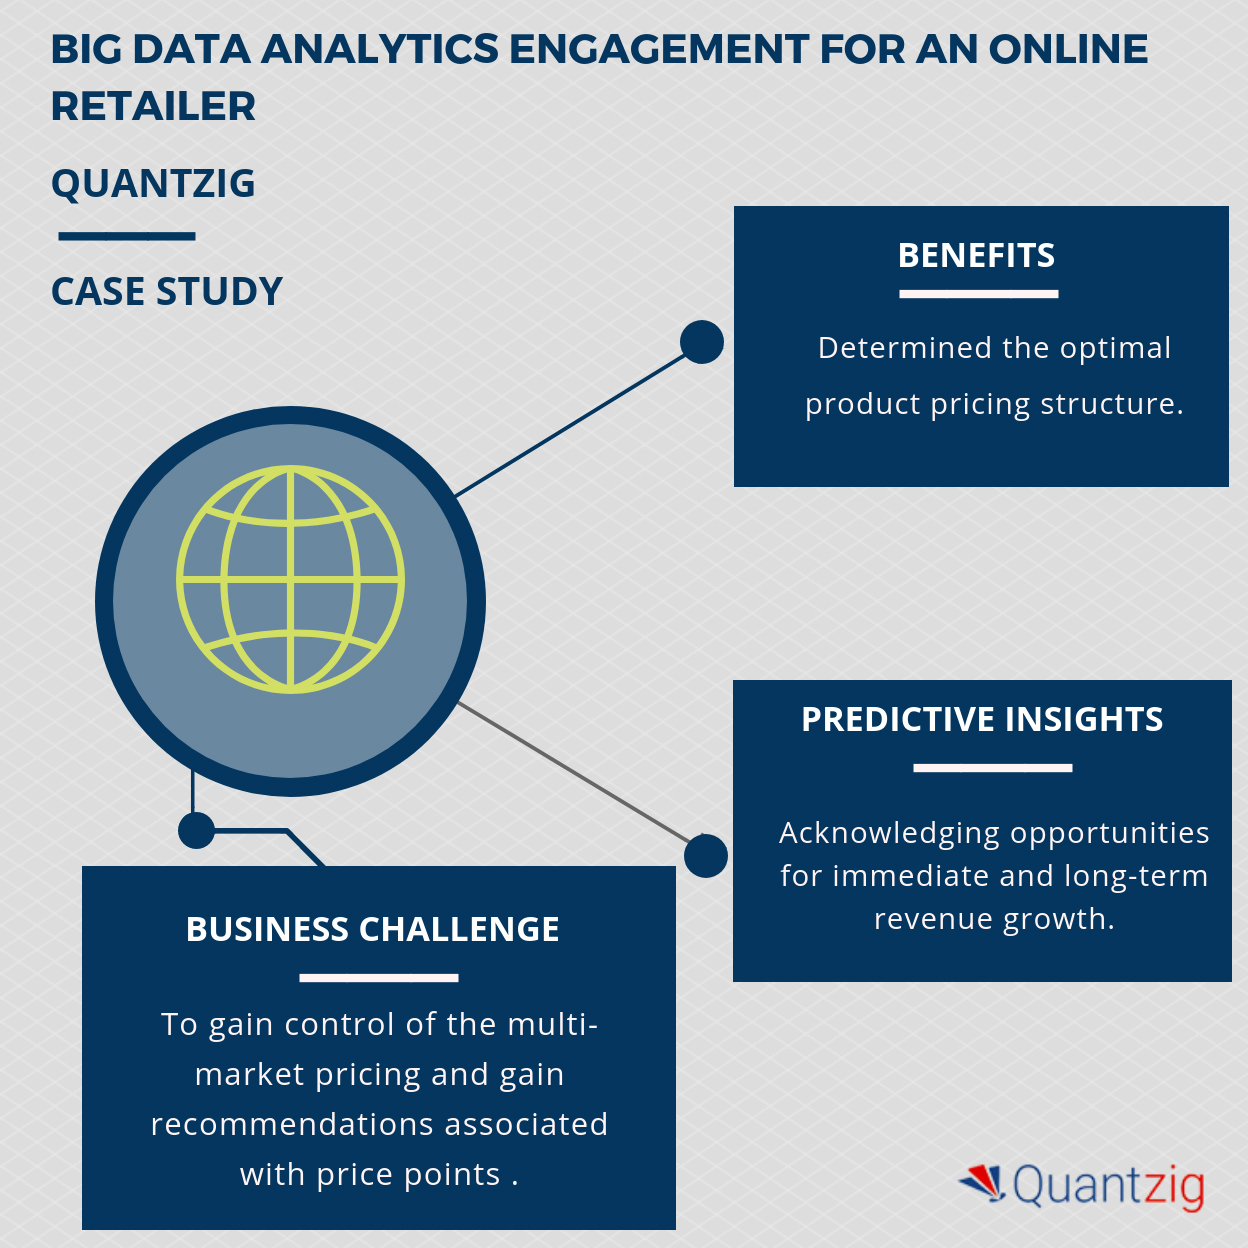 5 key reasons why data analytics is important to business